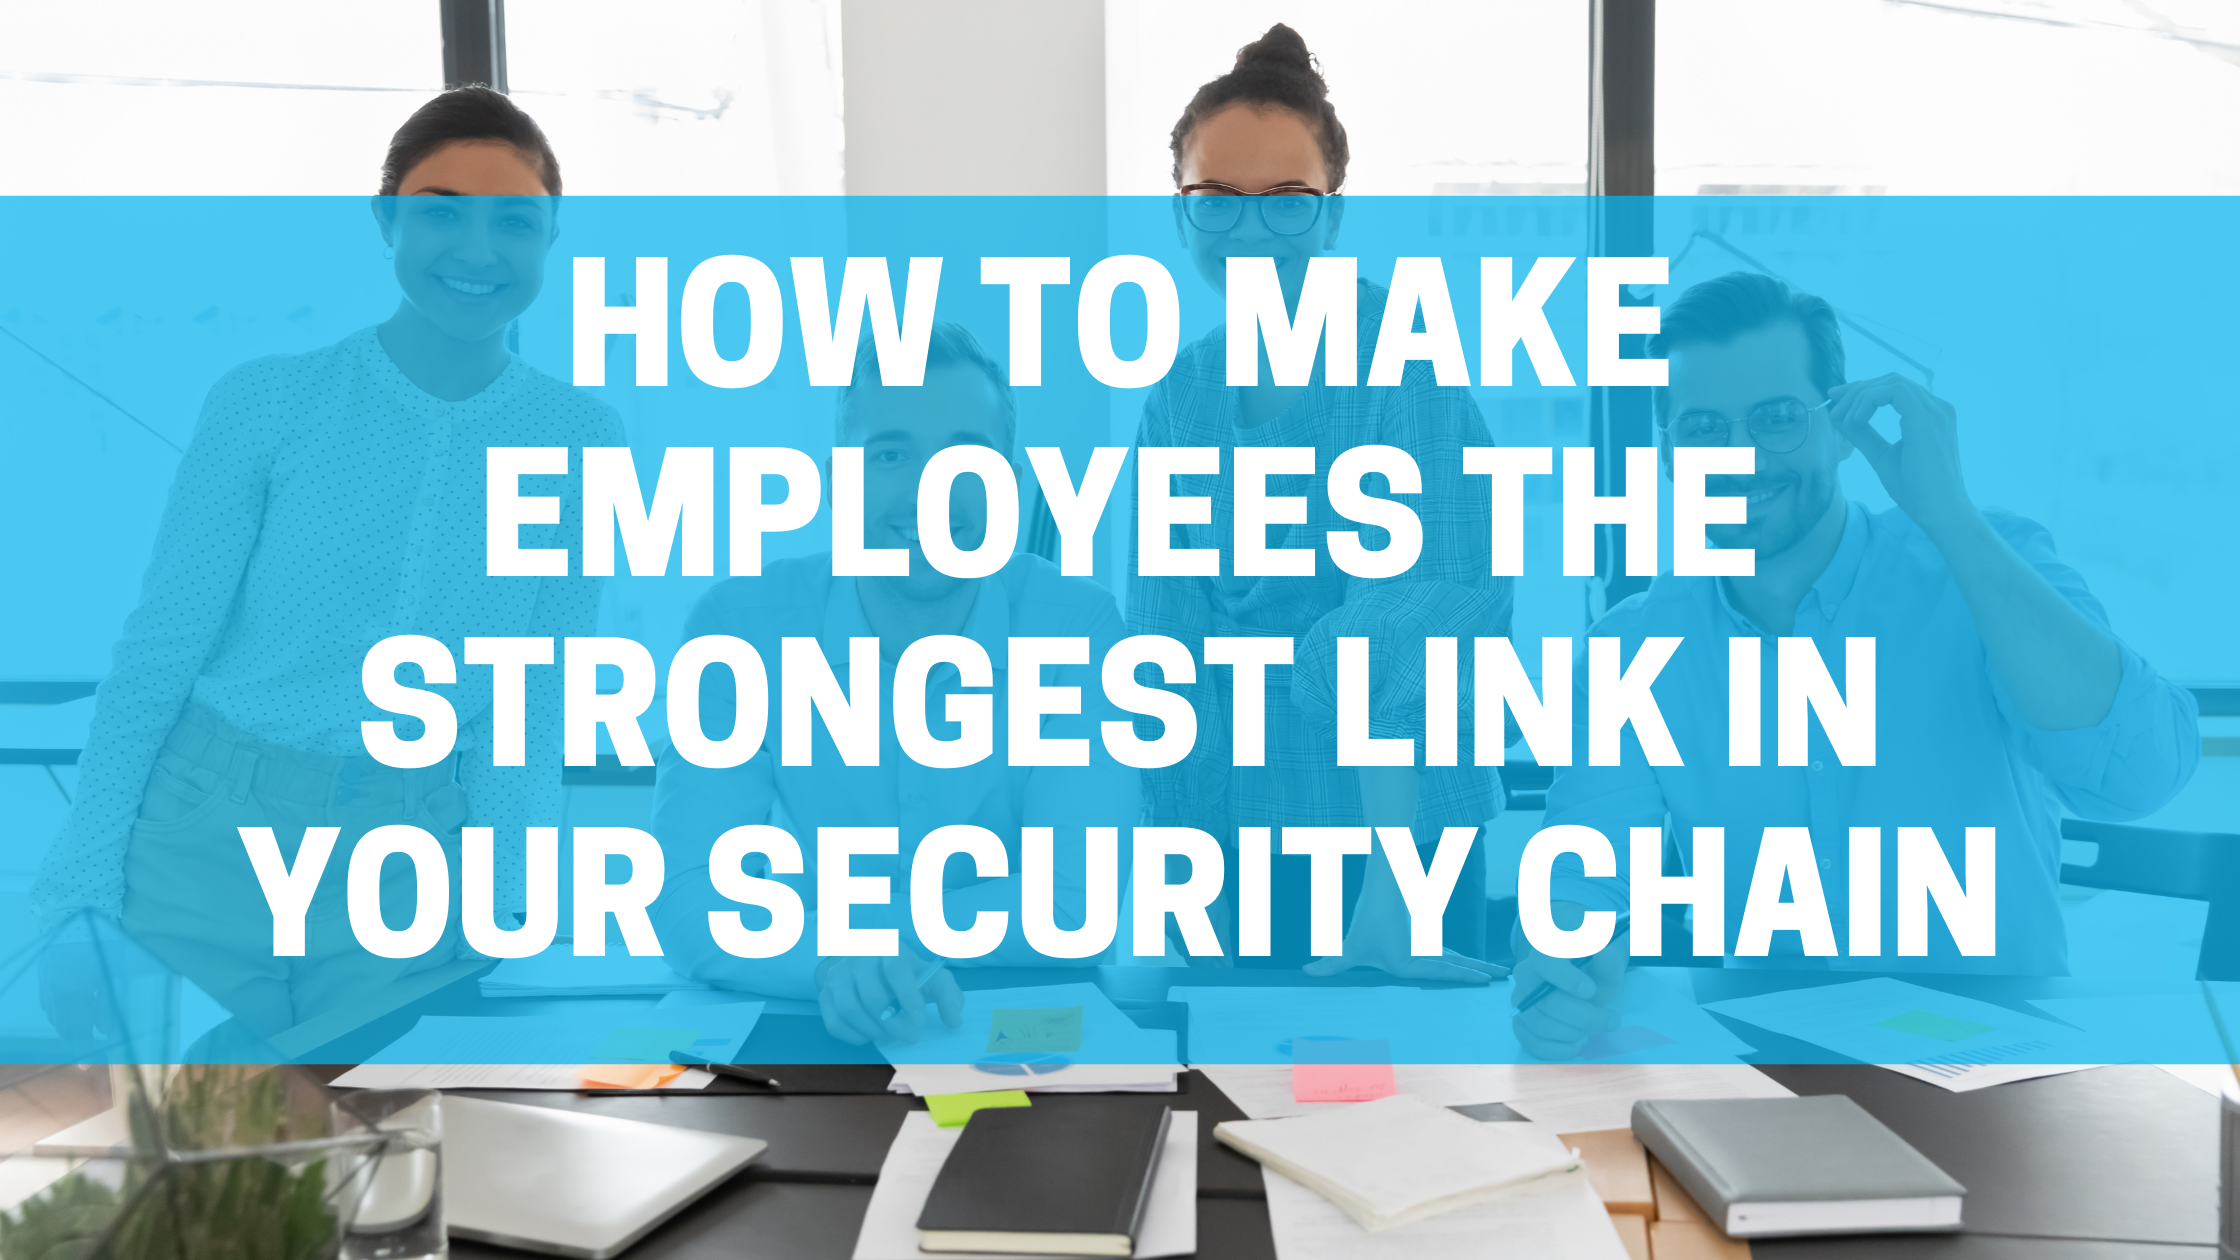 How To Make Employees The Strongest Link In Your Security Chain Featured